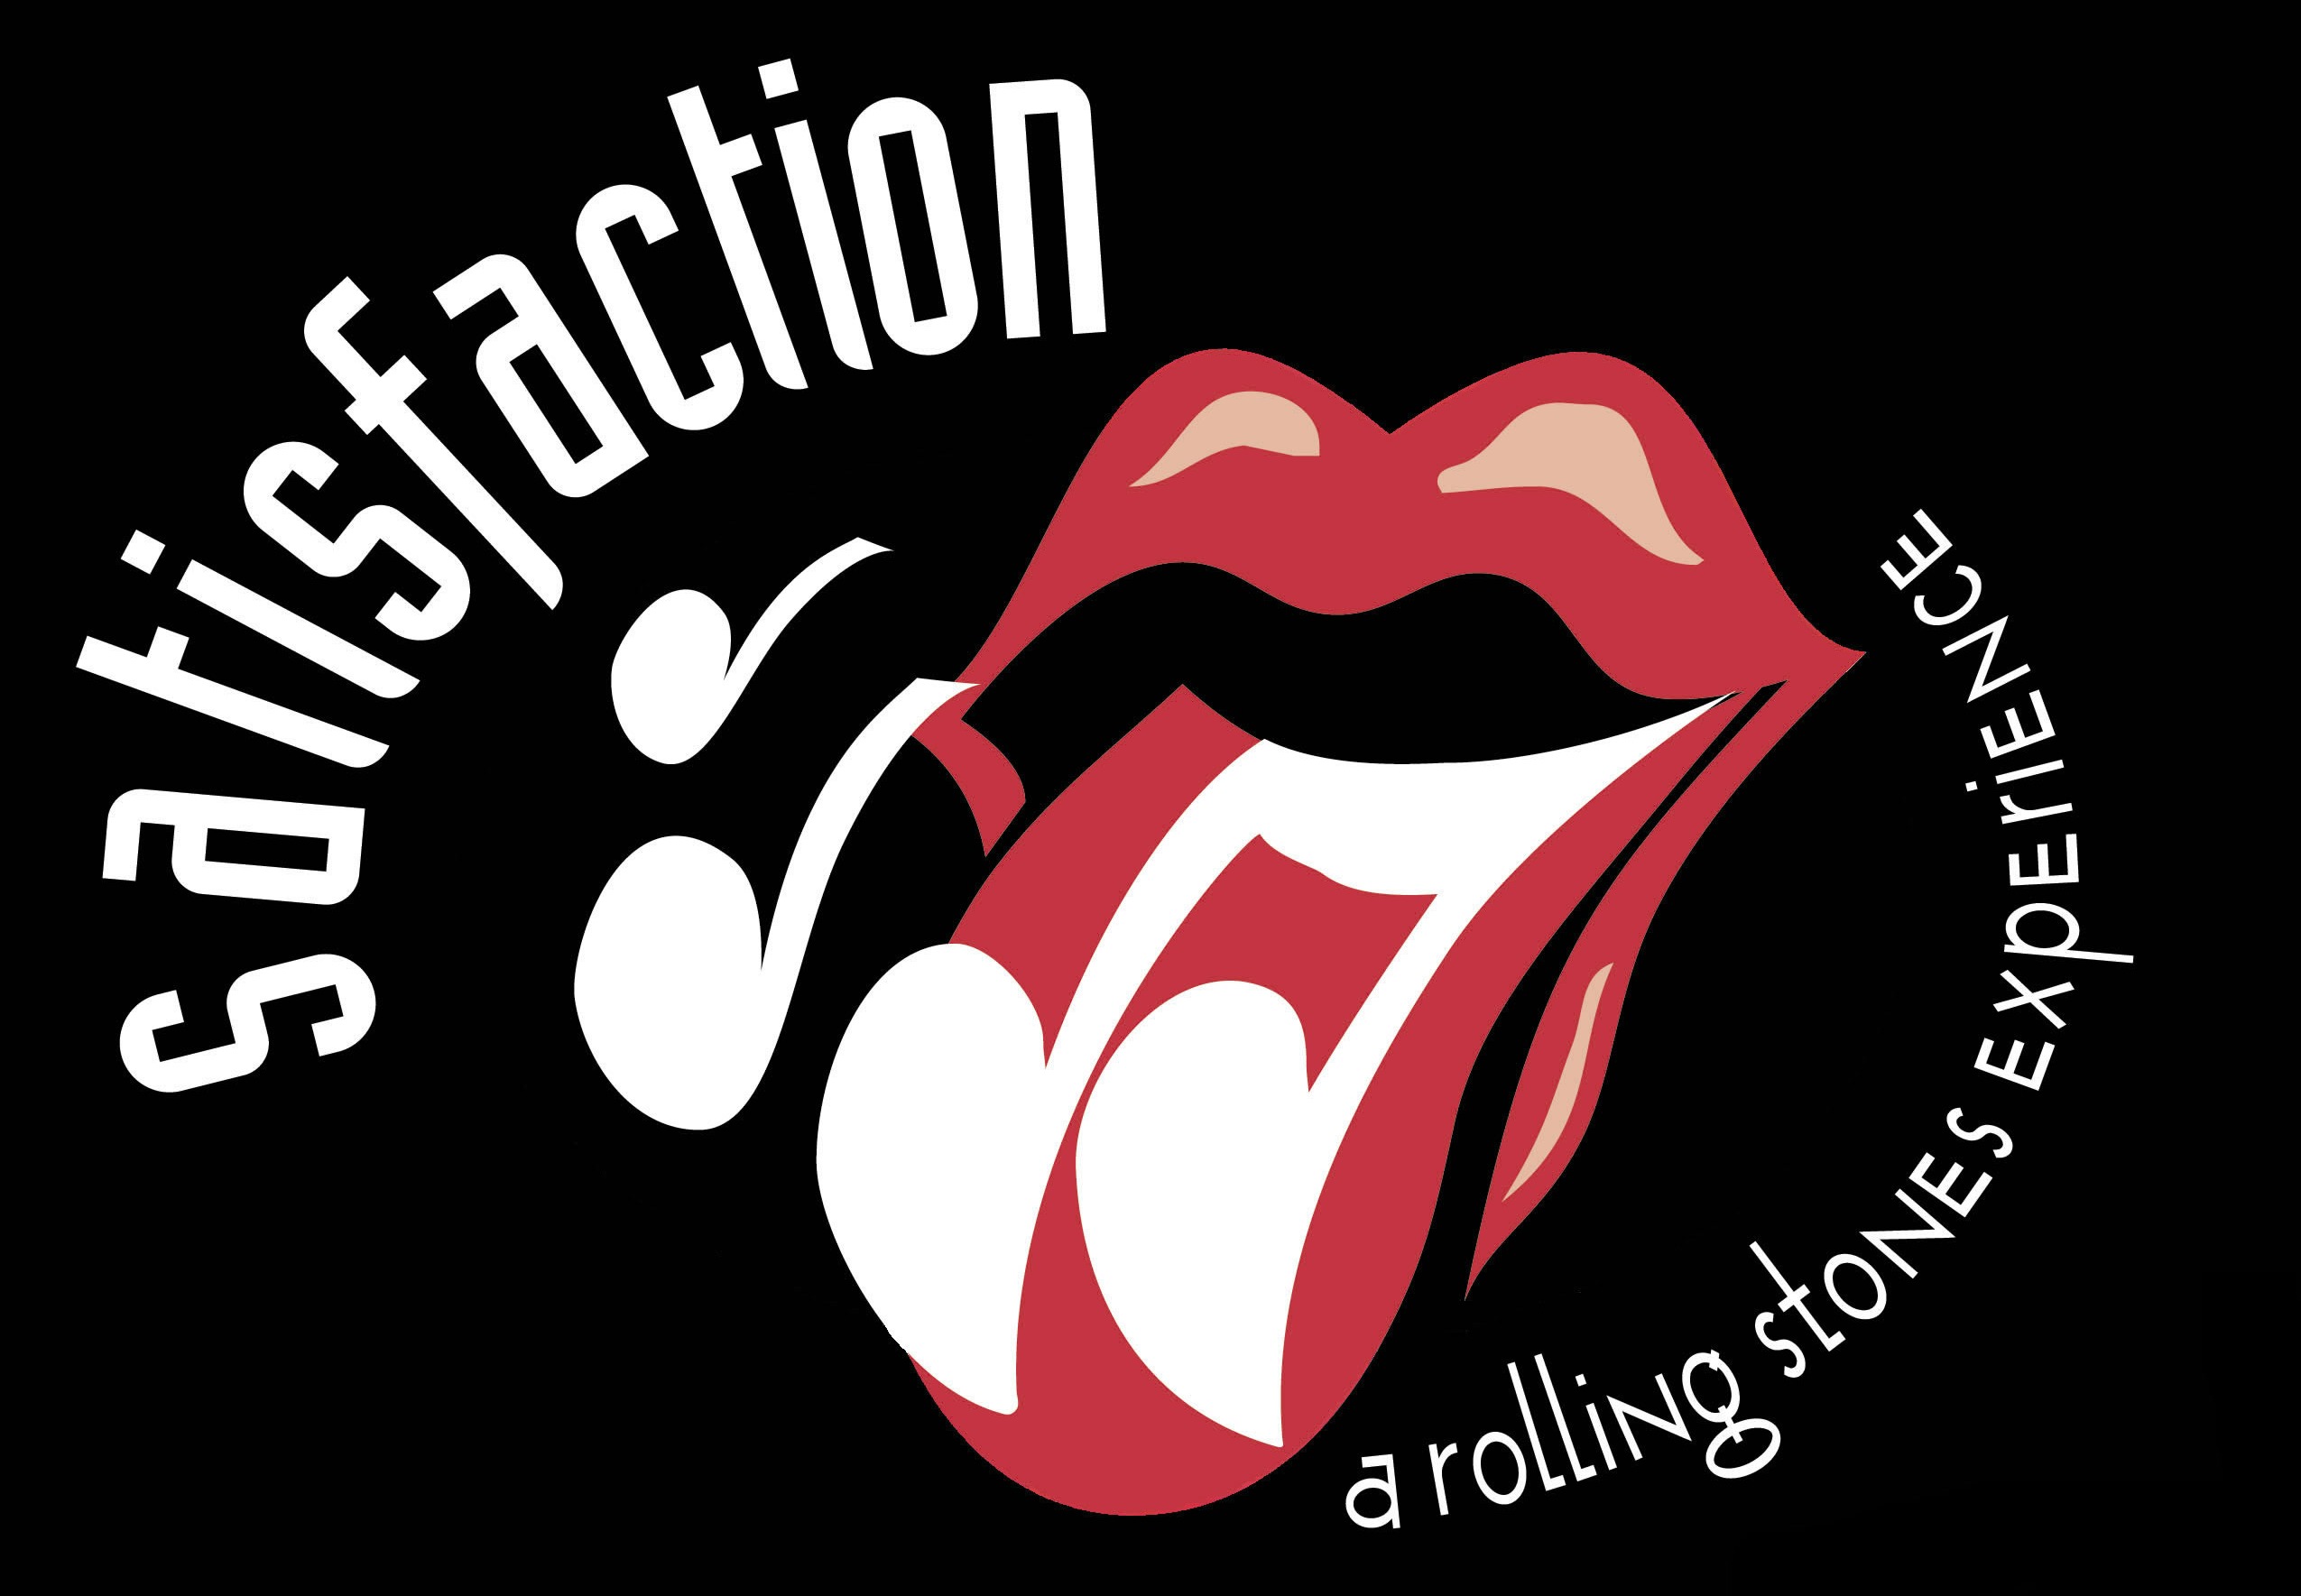 music, the rolling stones